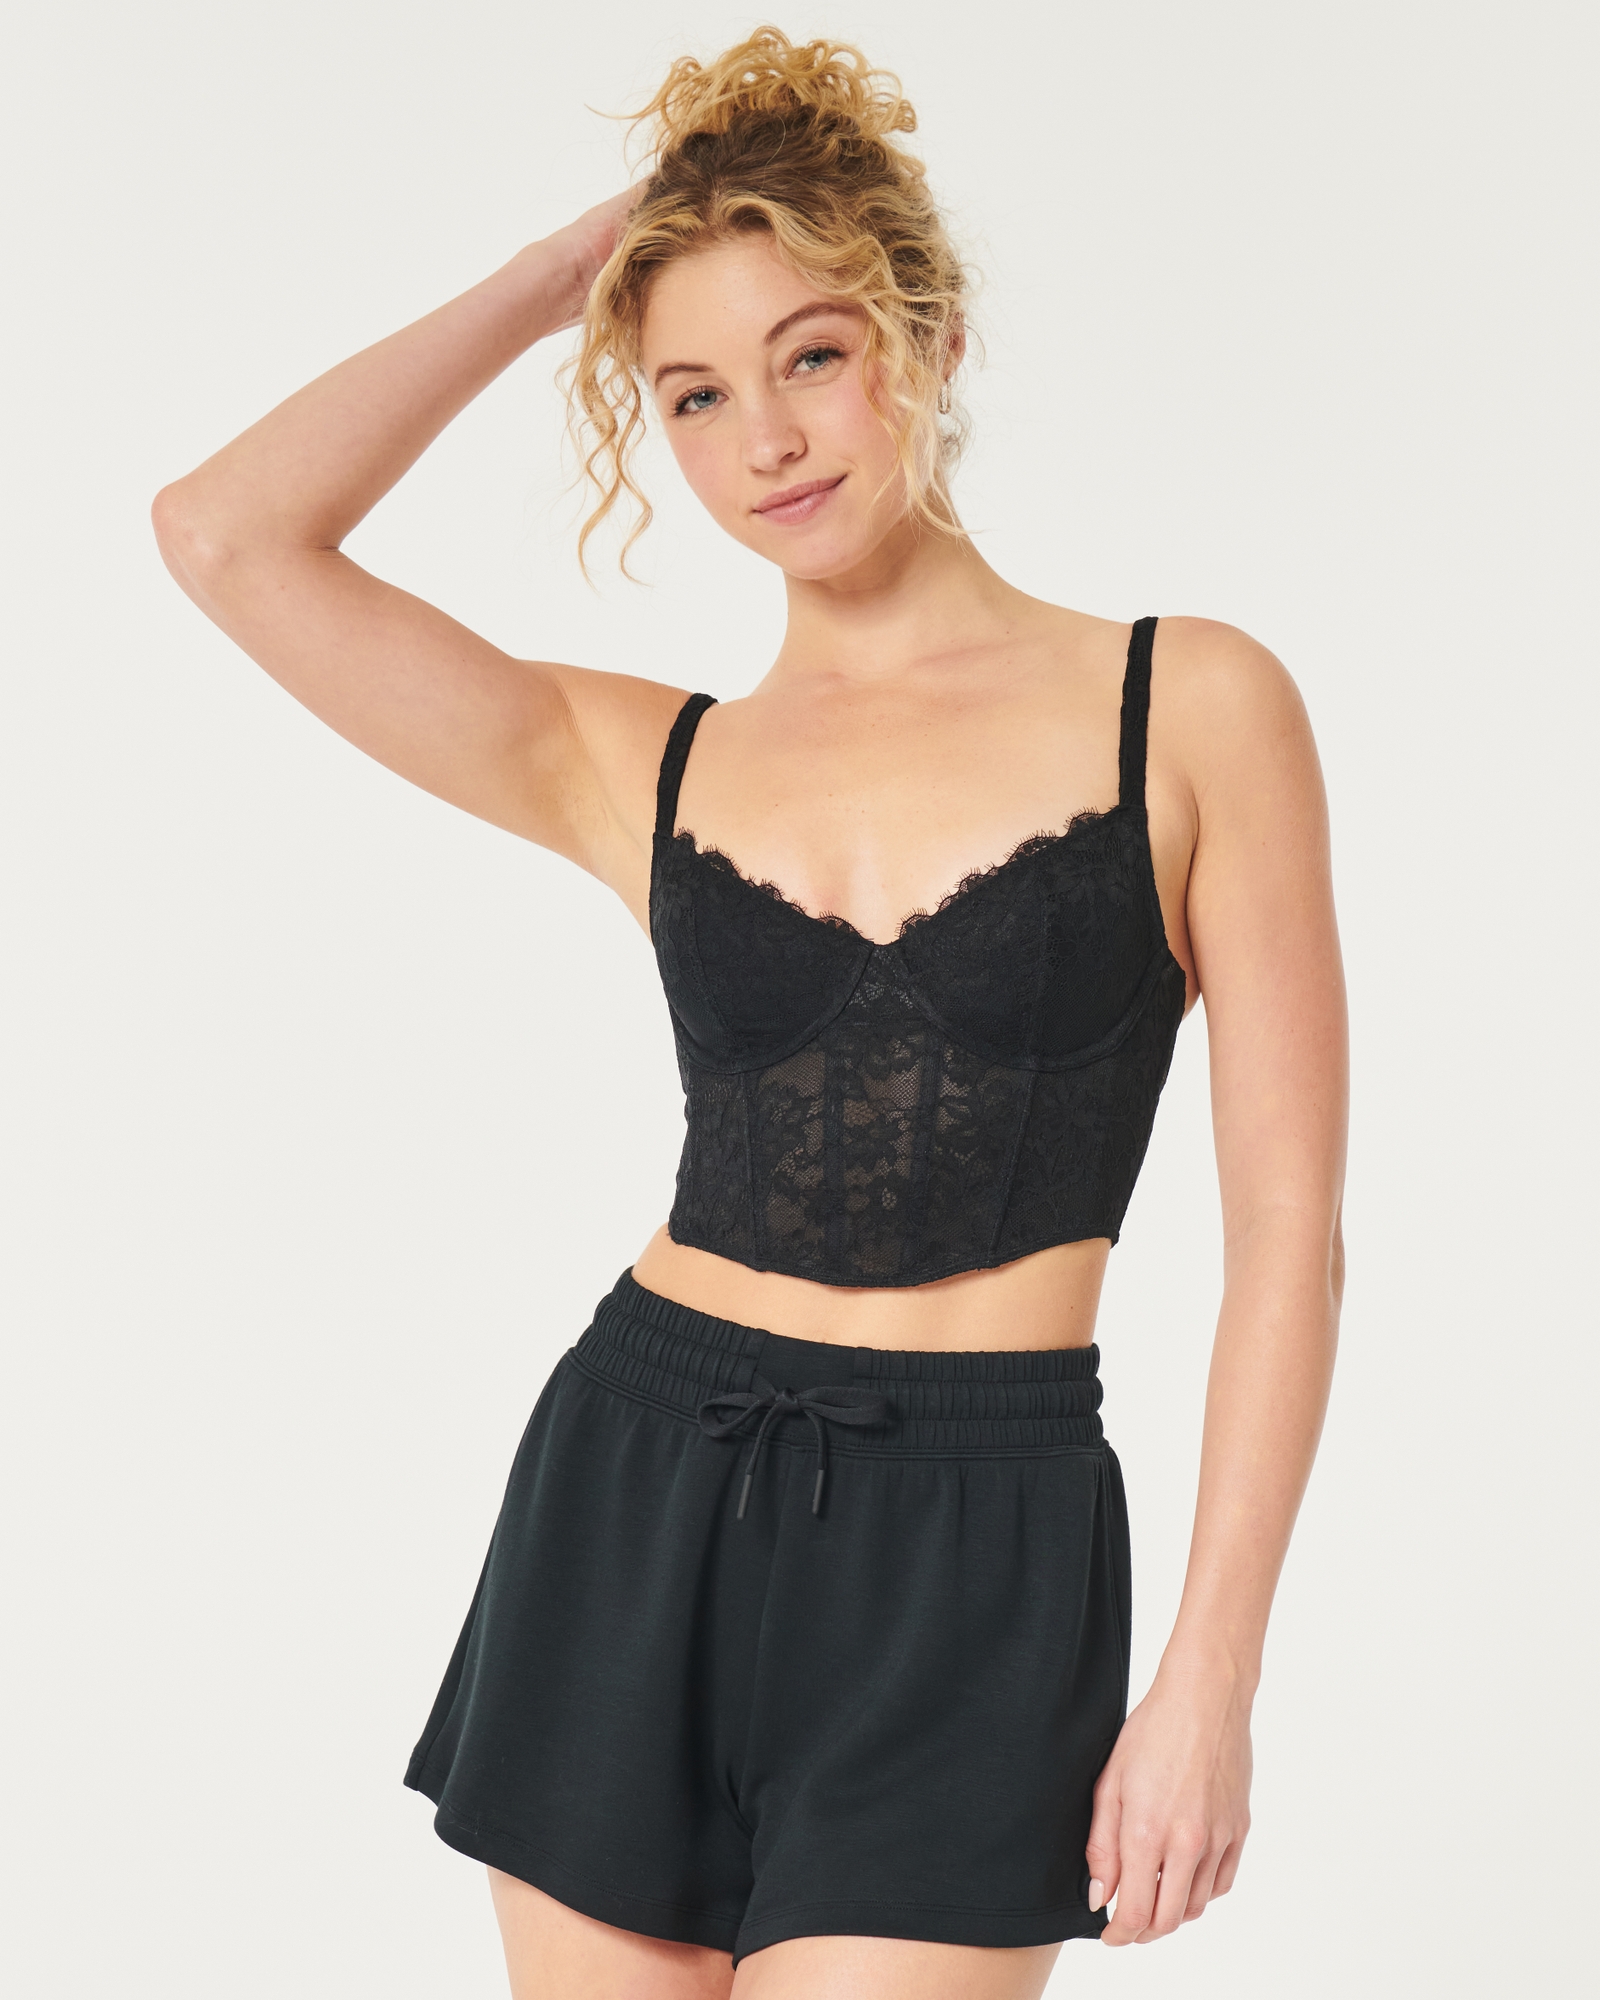 Hollister Hollister Gilly Hicks Micro & Lace Bustier 34.95